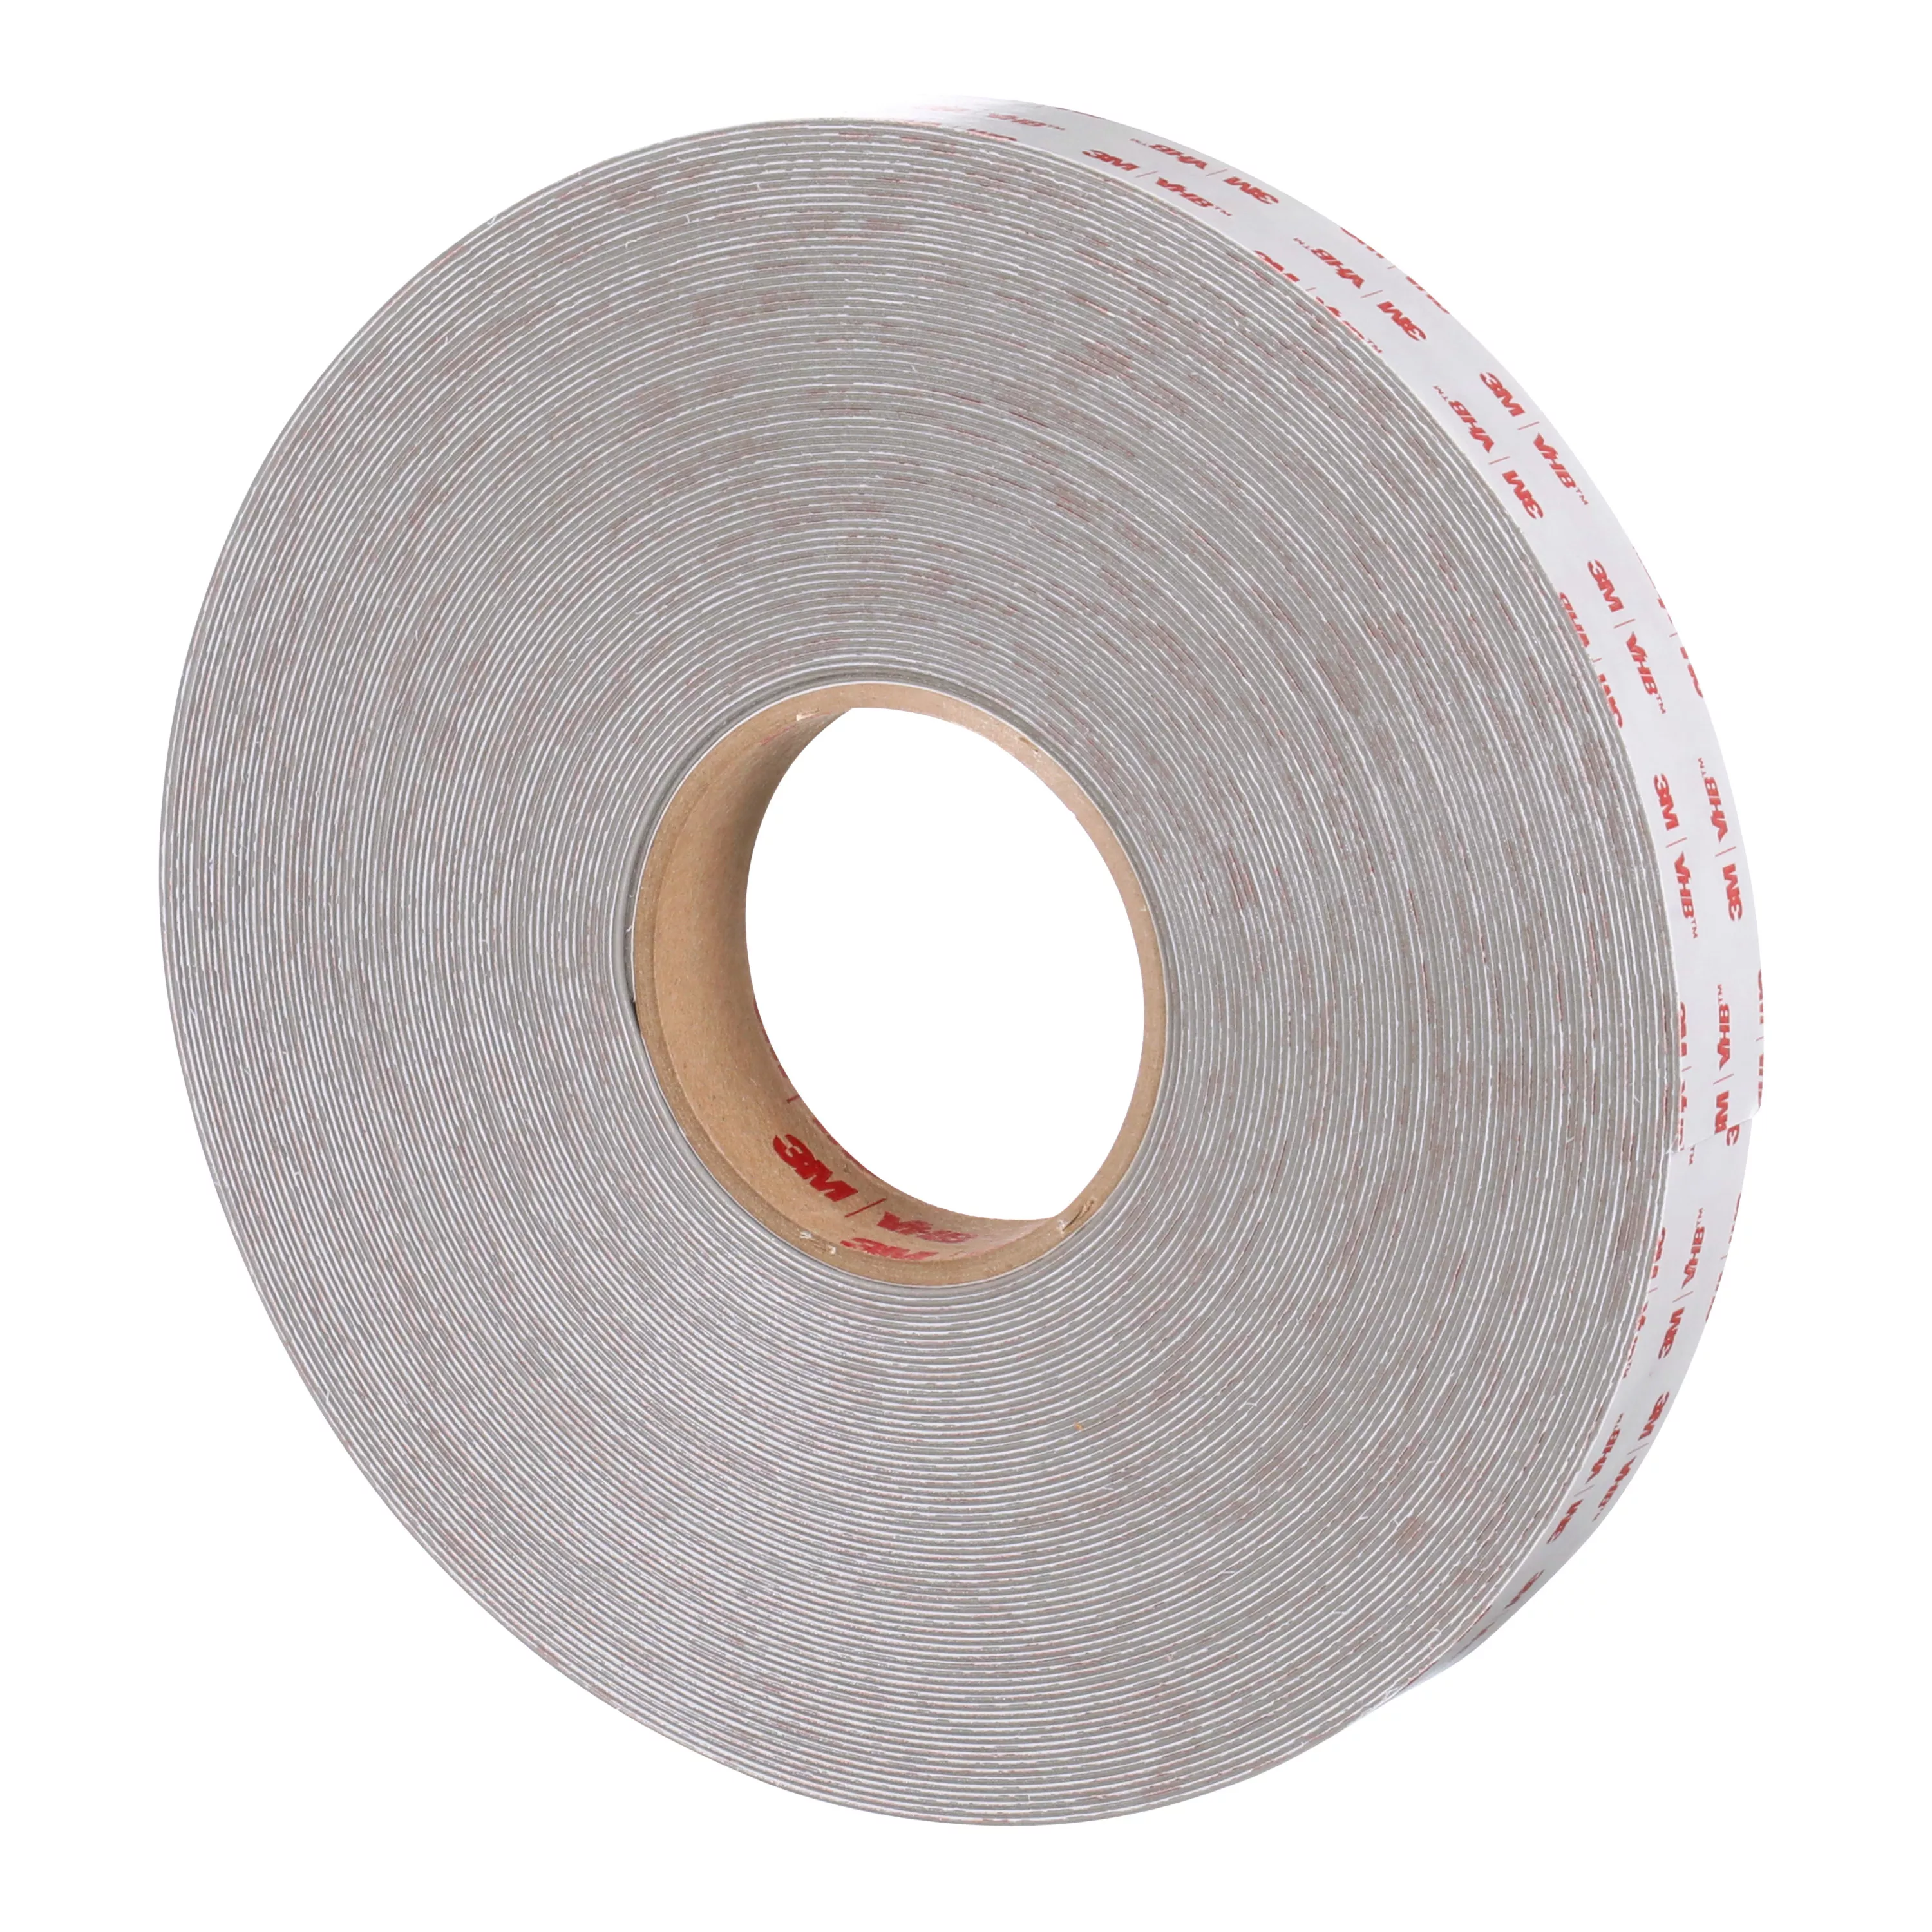 Product Number 4936 | 3M™ VHB™ Tape 4936